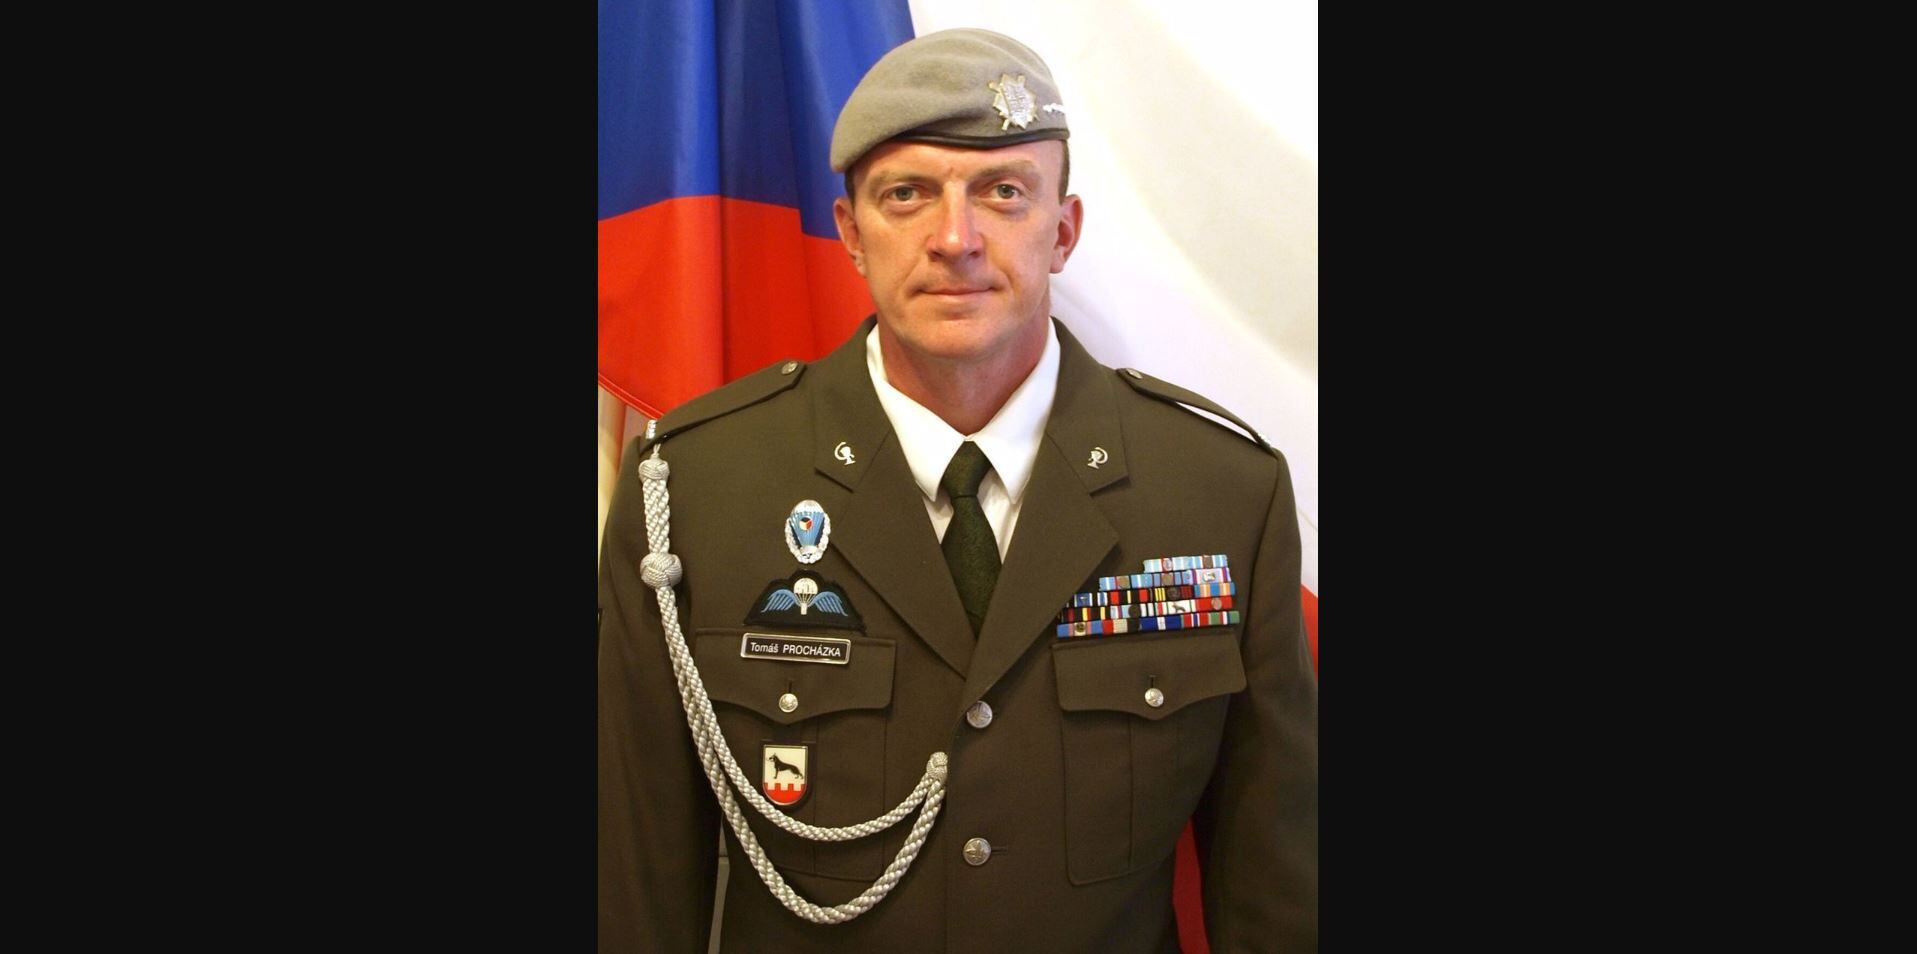 Tomáš Procházka, a Czech soldier, was killed during an insider attack on his vehicle in Afghanistan in Oct. 22, 2018. Two other Czech troops were wounded. (Czech Army)